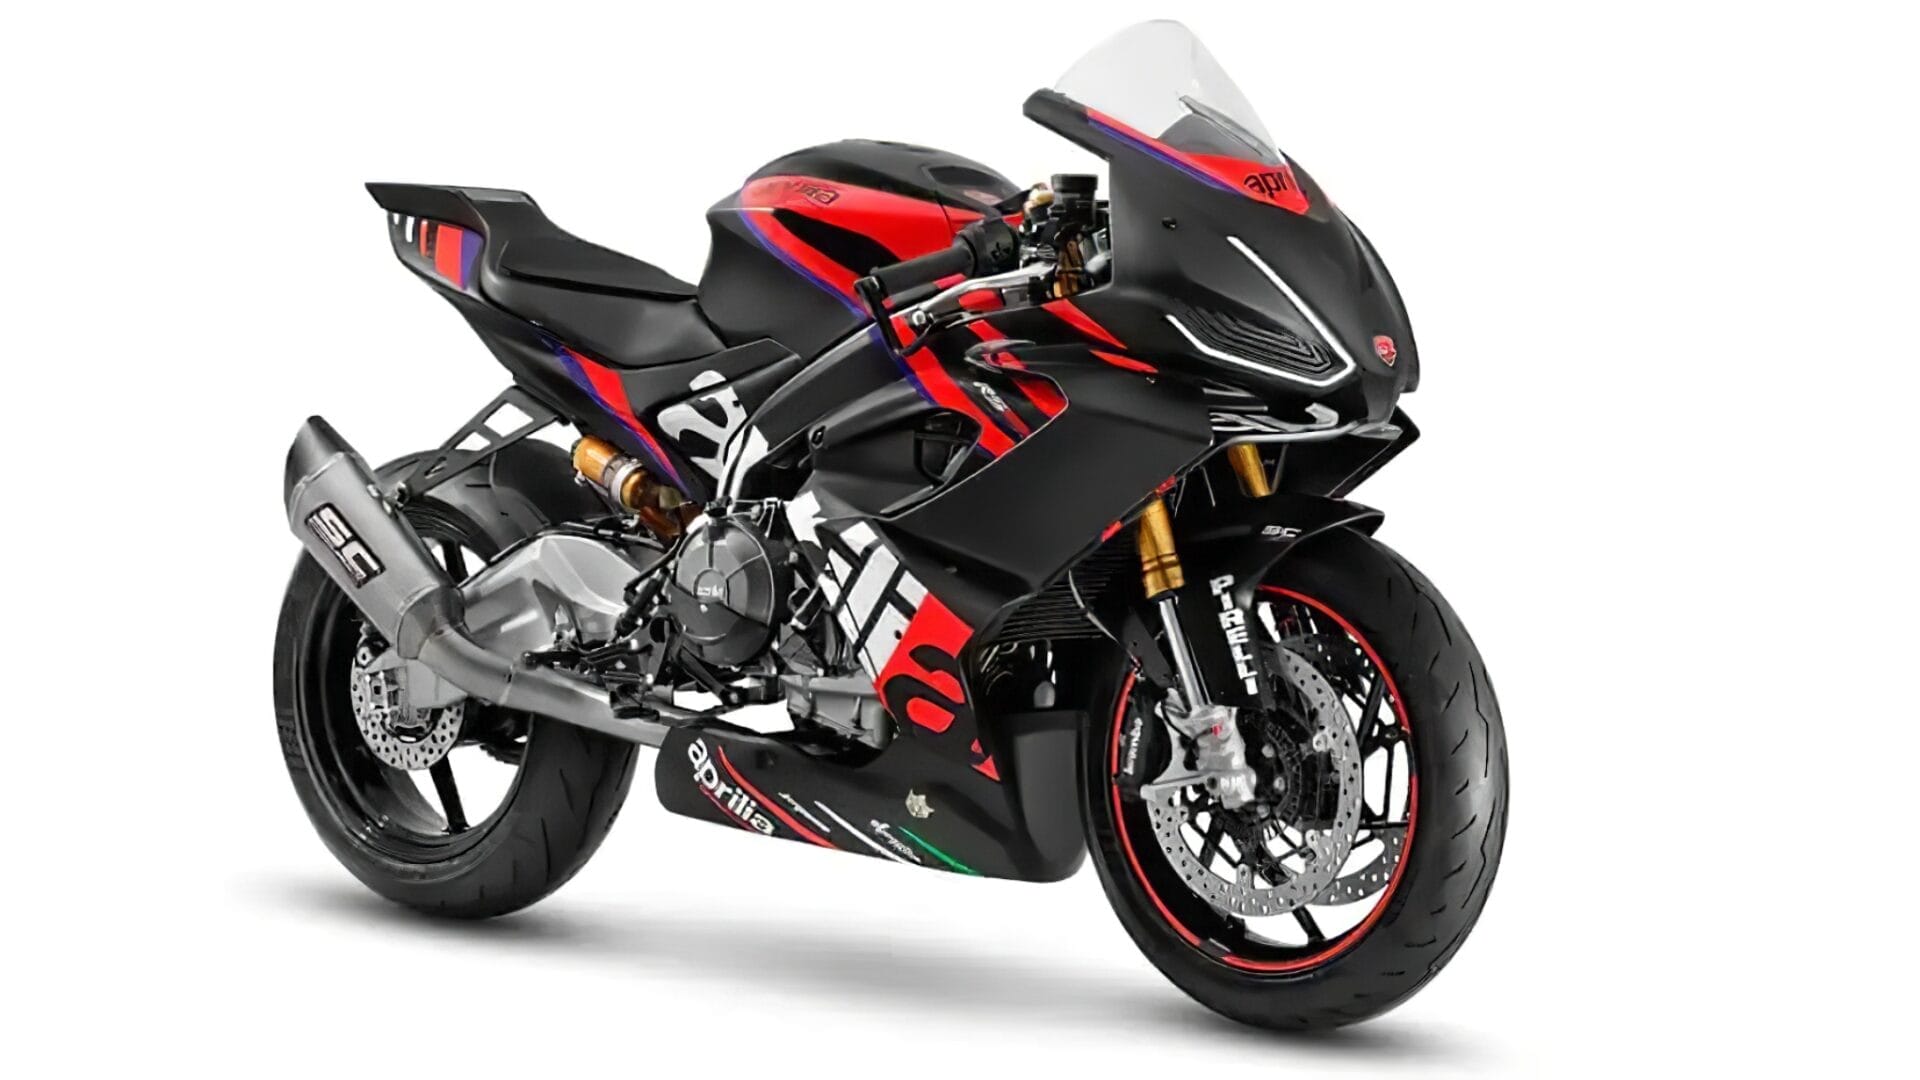 Aprilia RS 660 Trofeo: A limited edition model for the racetrack